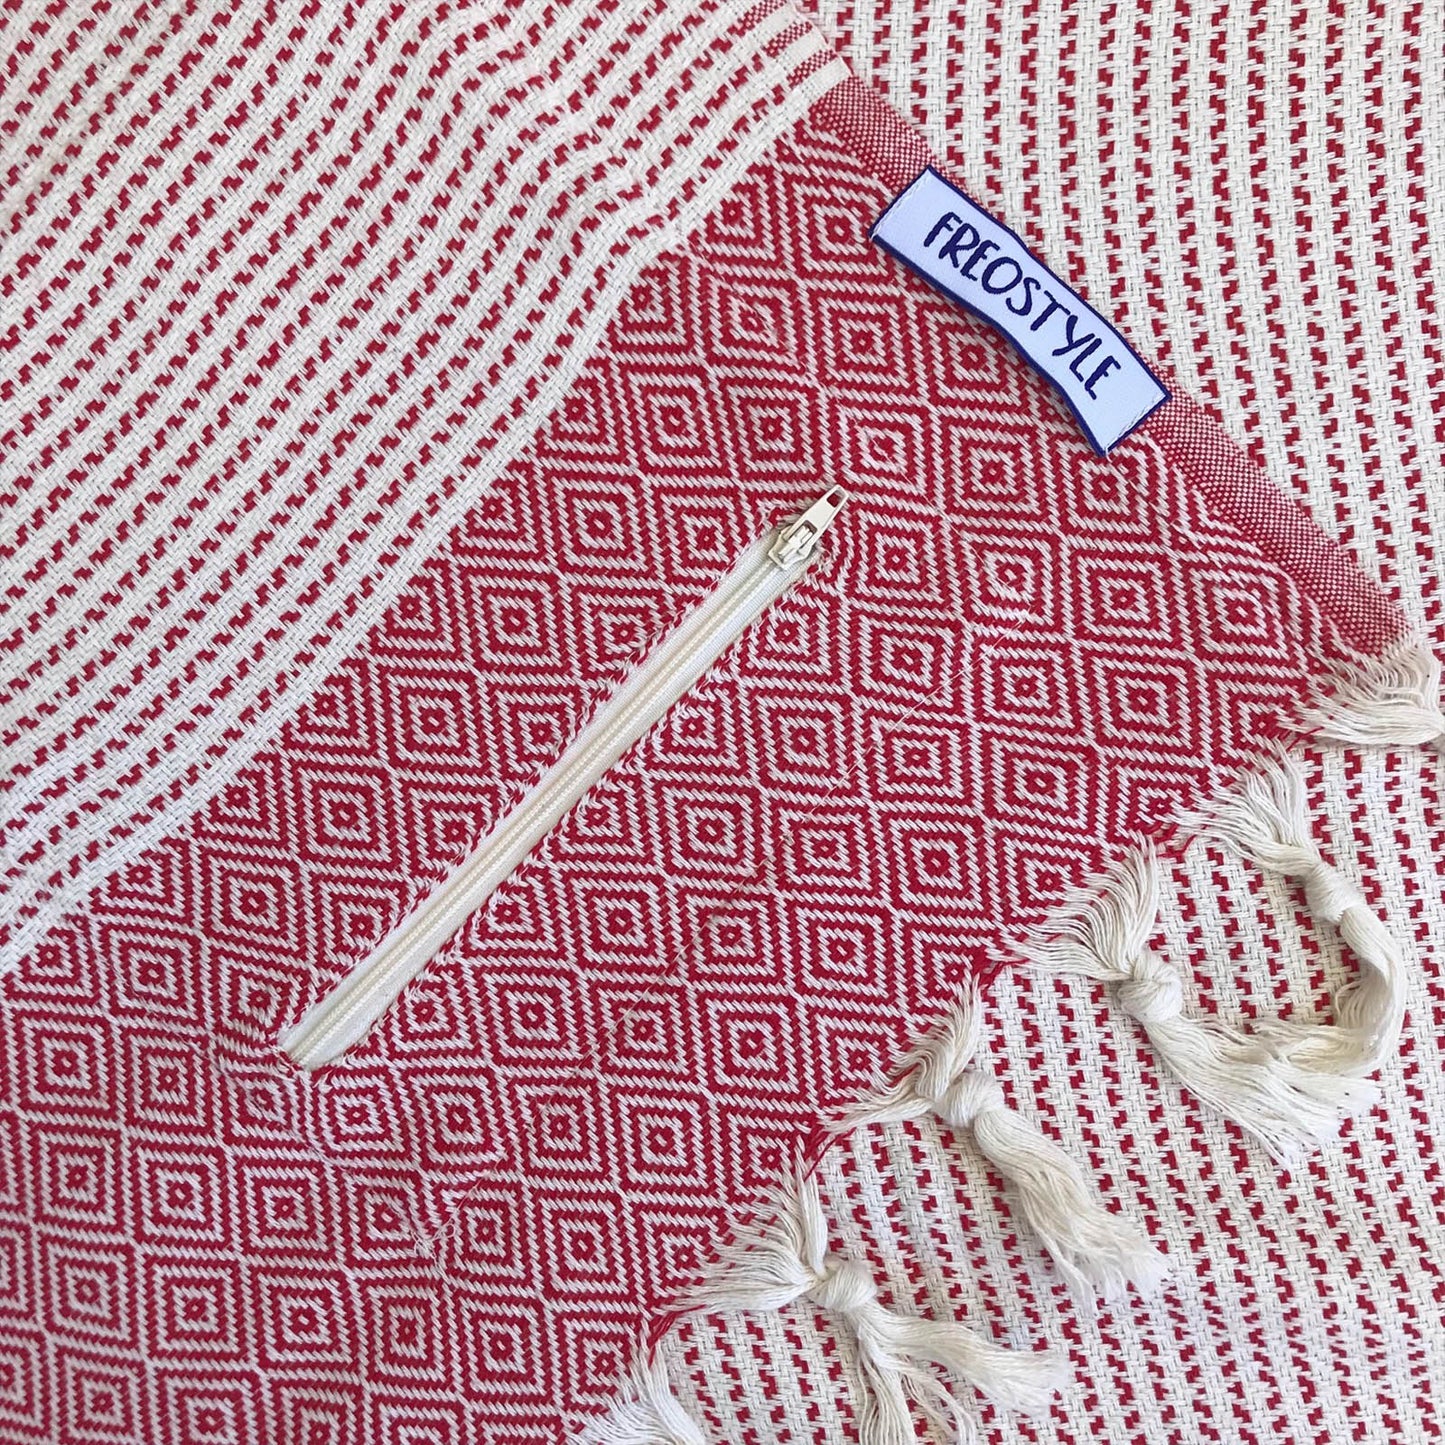 Freostyle Turkish Beach Towel with Pockets, Ferro, red, close up of pocket